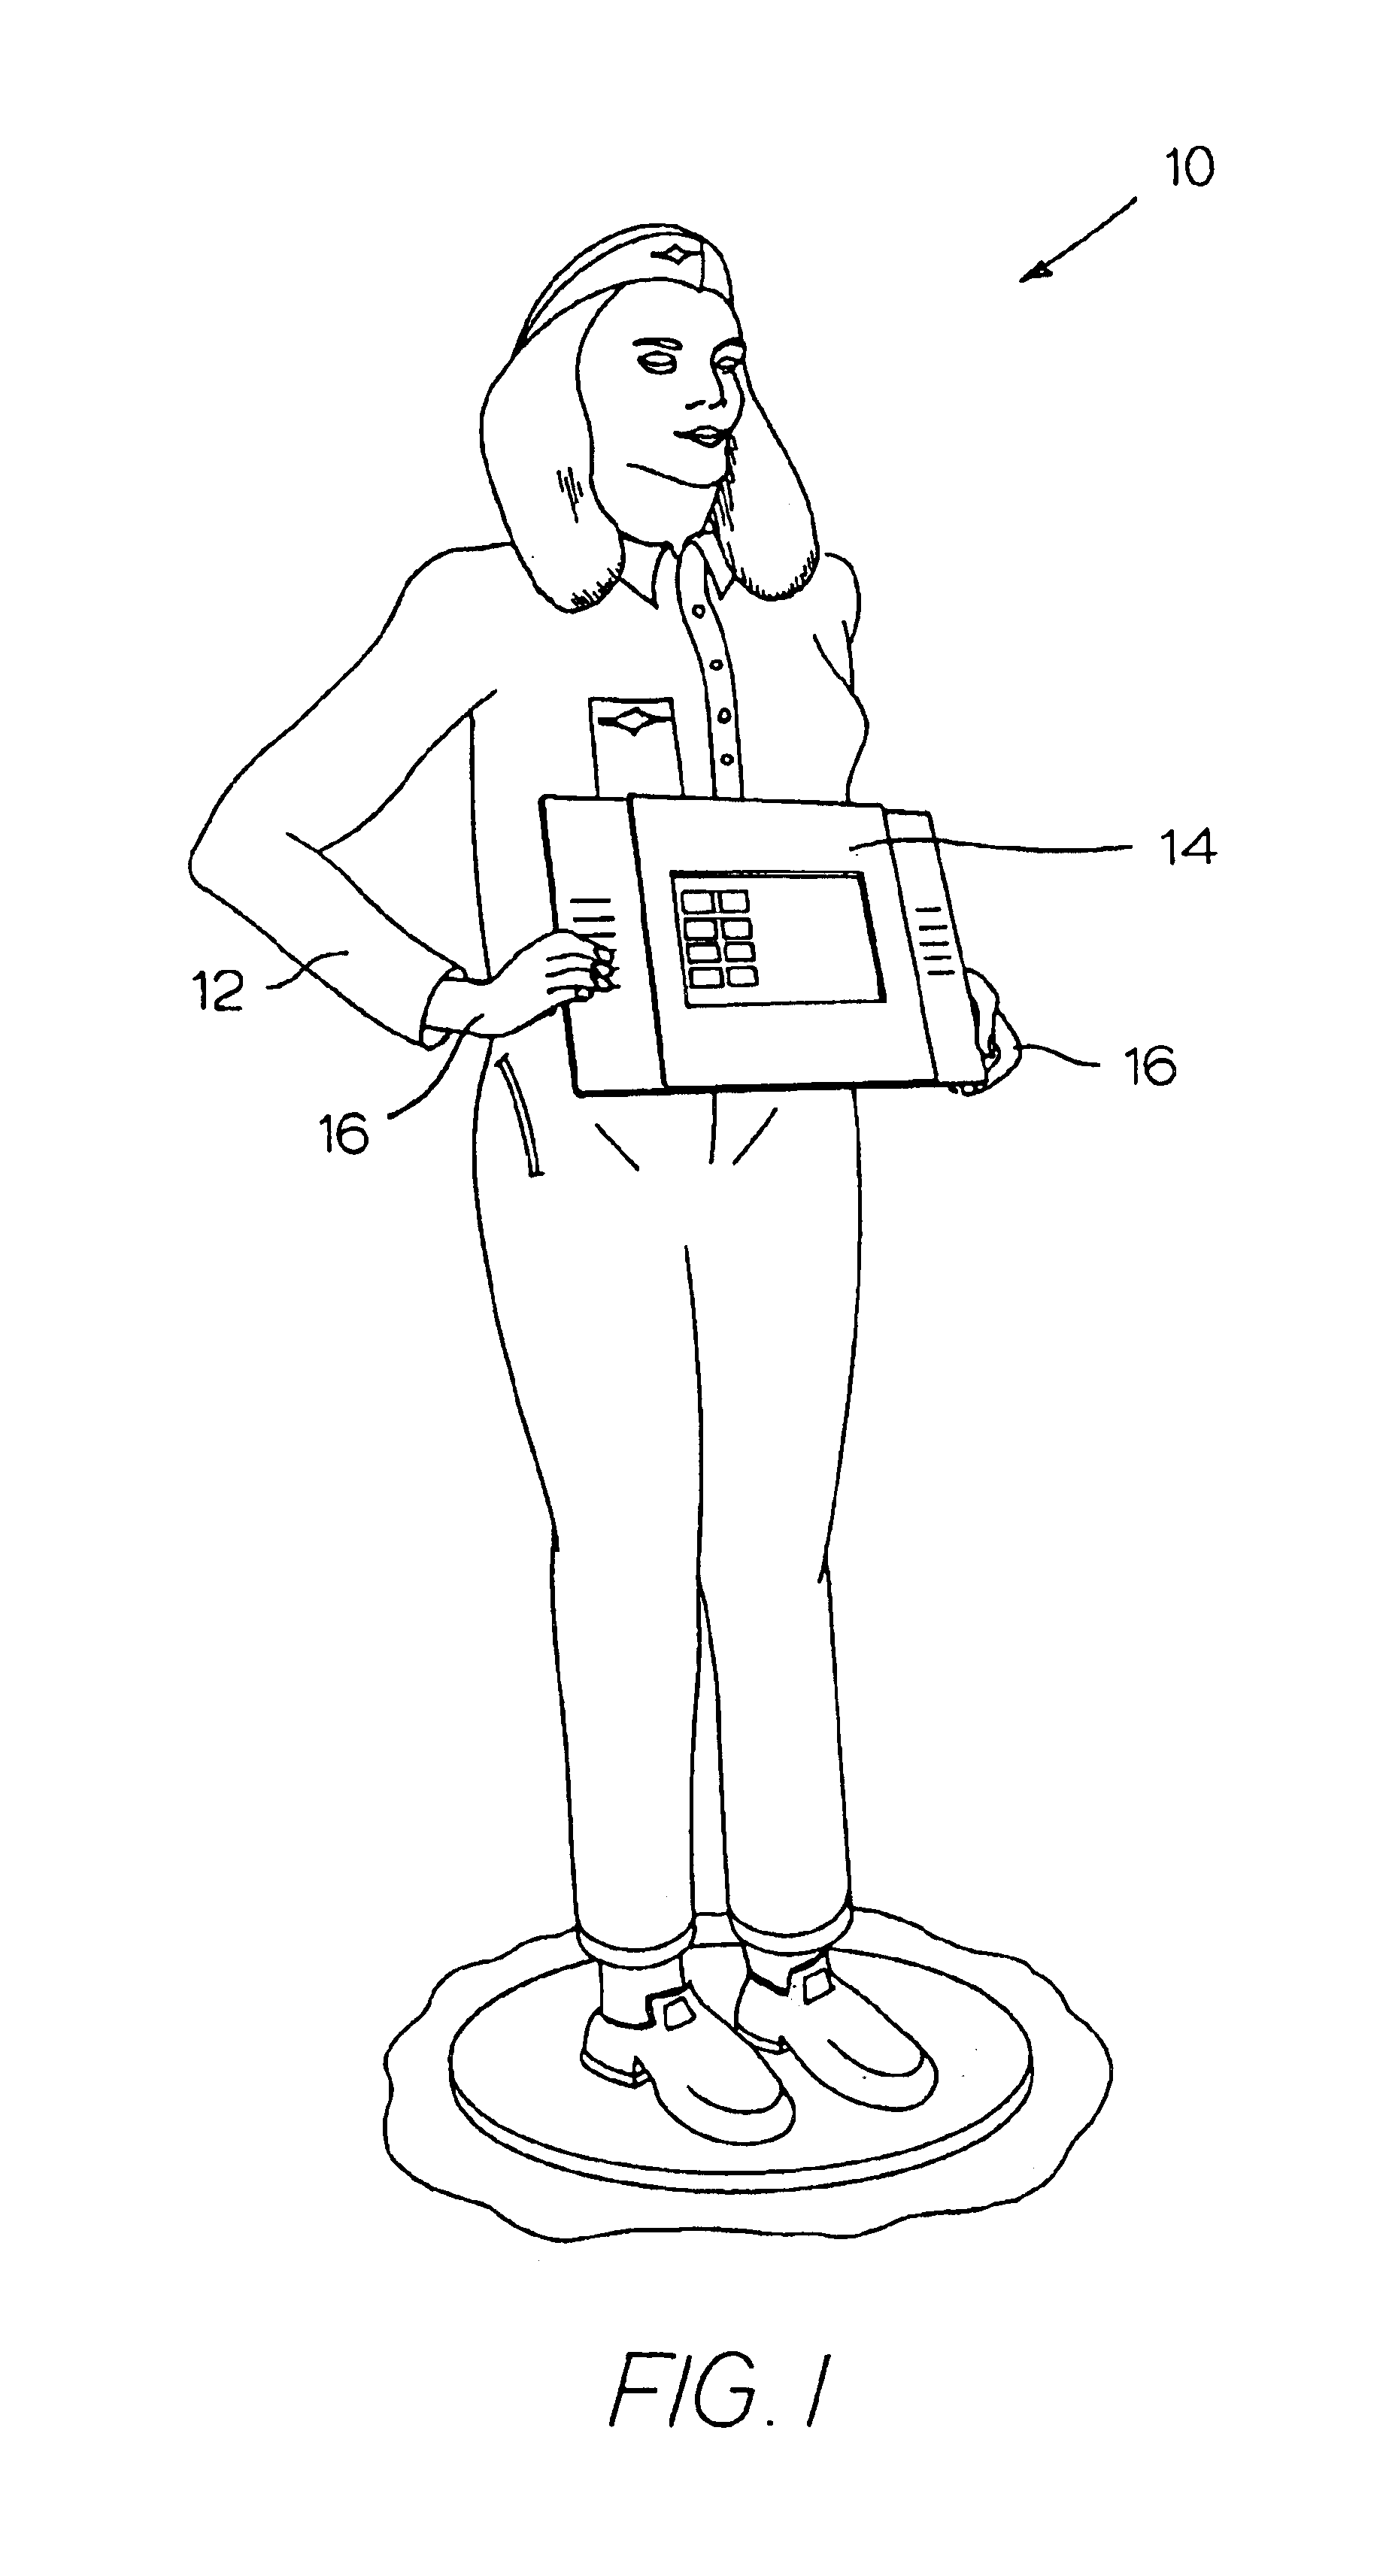 Apparatus and system for displaying wares and services including a mannequin and interactive display panel